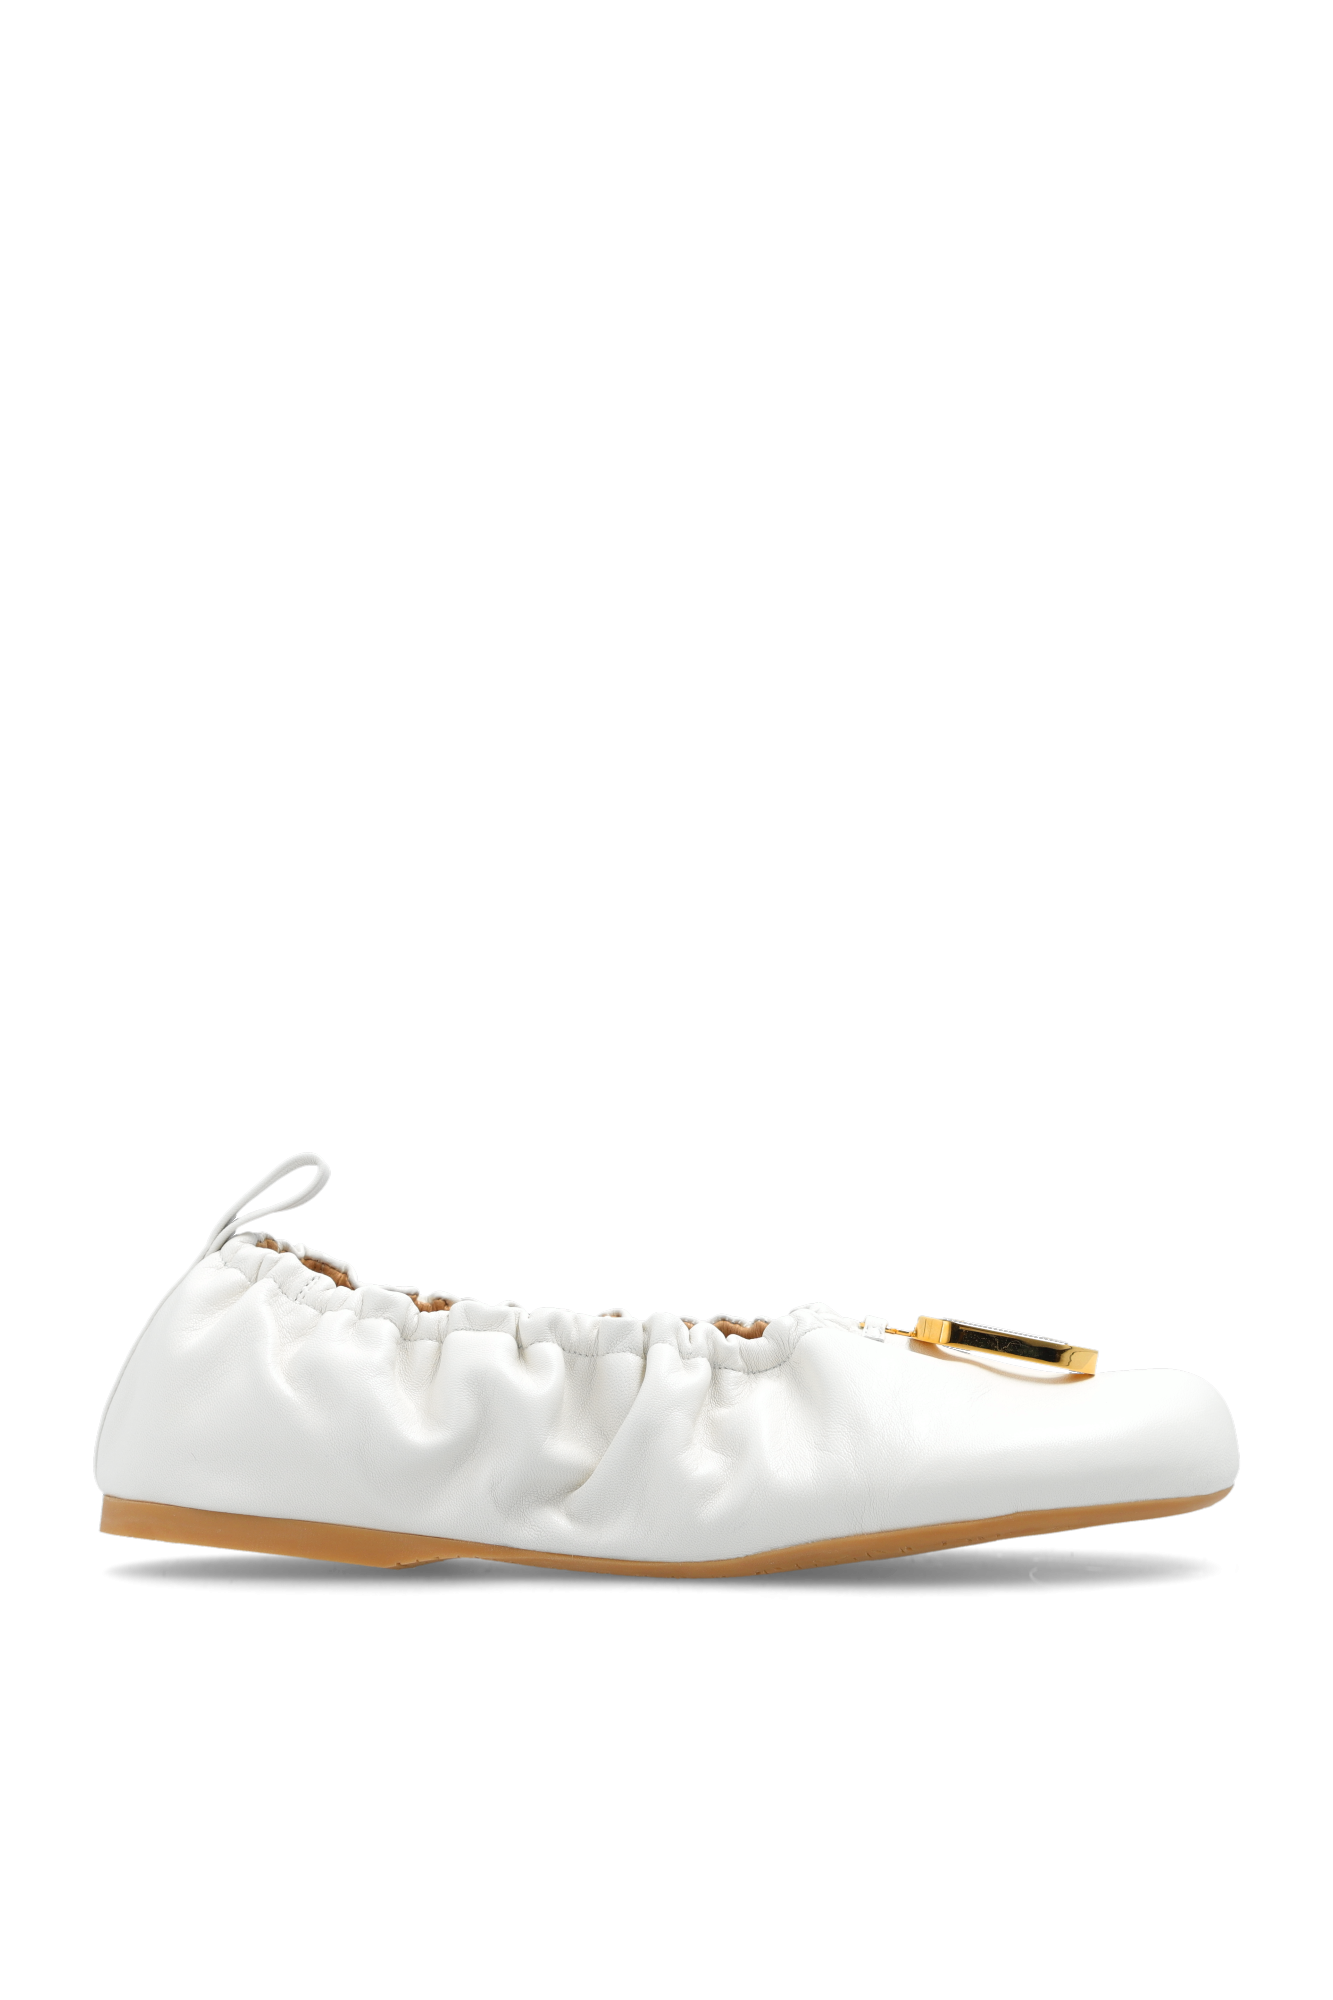 JW Anderson Sneakers GEOX D Blomiee B D166HB 0BCBN C0007 White Silver